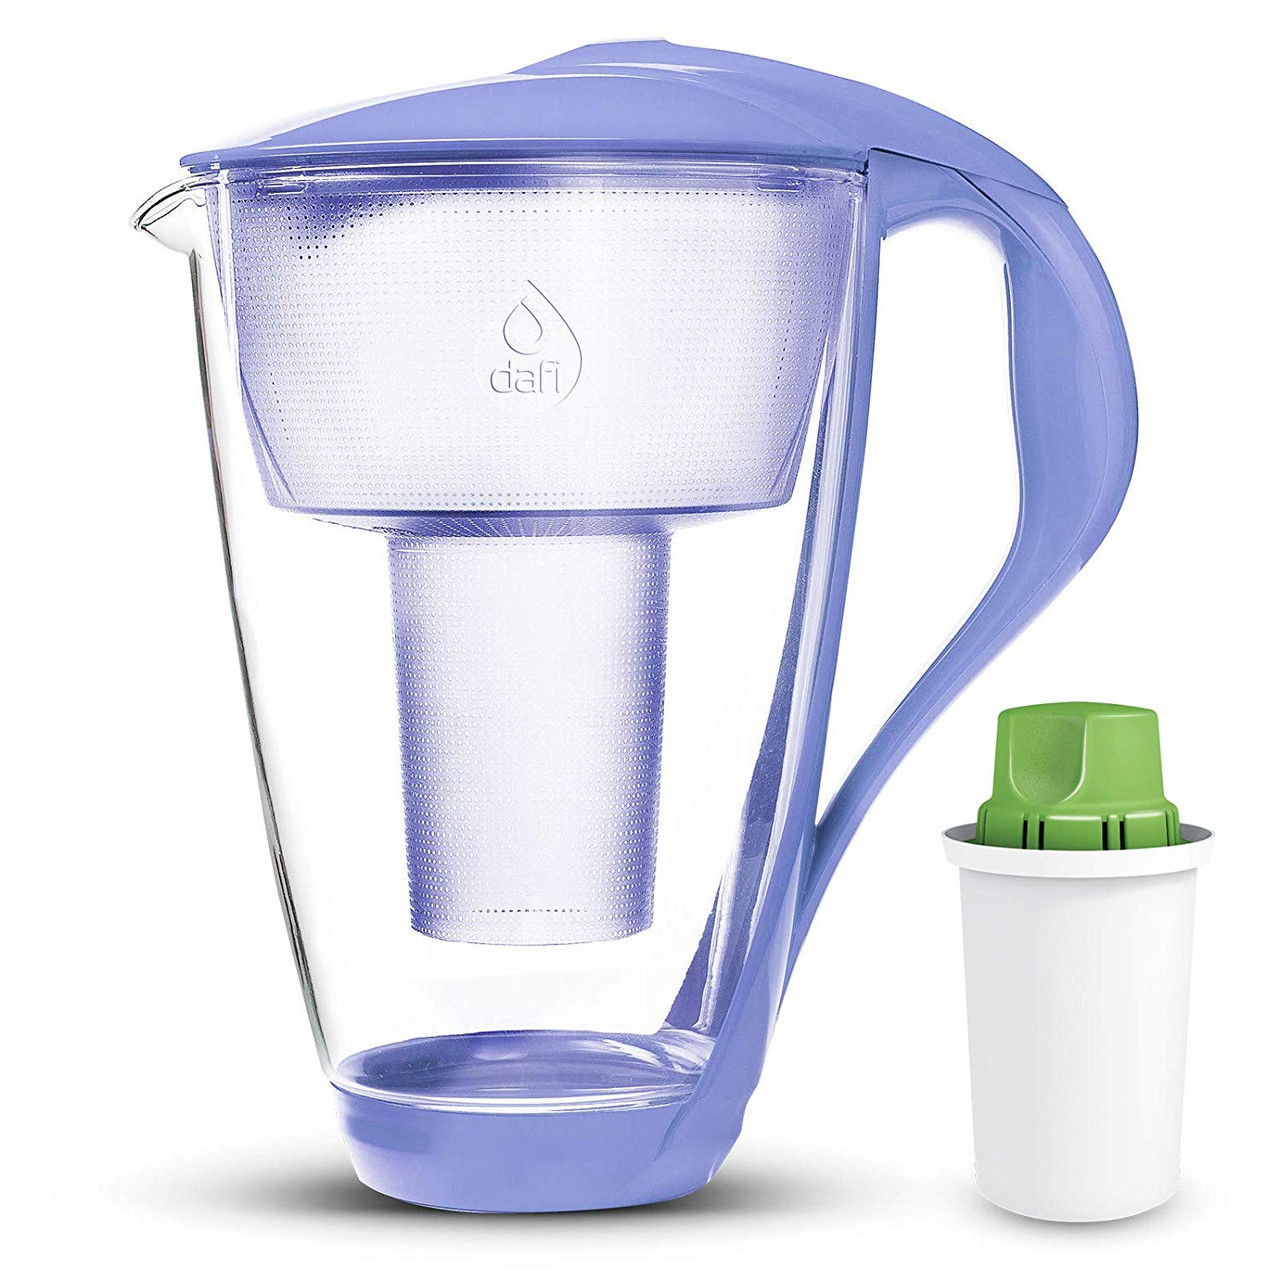 Dafi Crystal Glass Filtering Water Pitcher 8 Cups LED Violet + Alkaline Filter Made in Europe BPA-Free